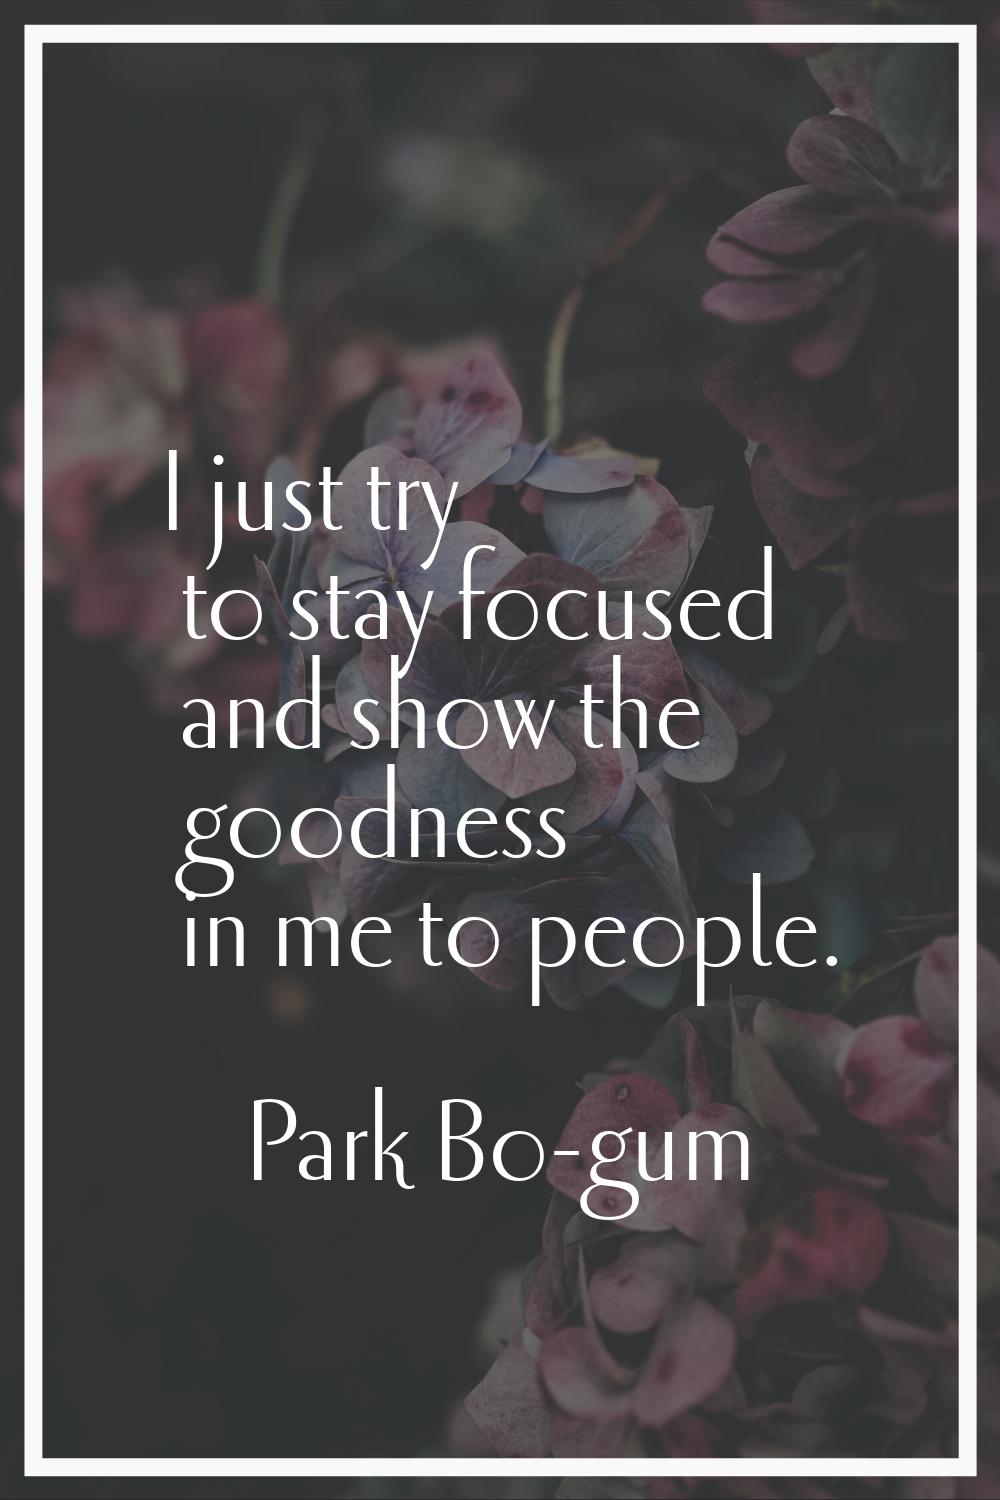 I just try to stay focused and show the goodness in me to people.